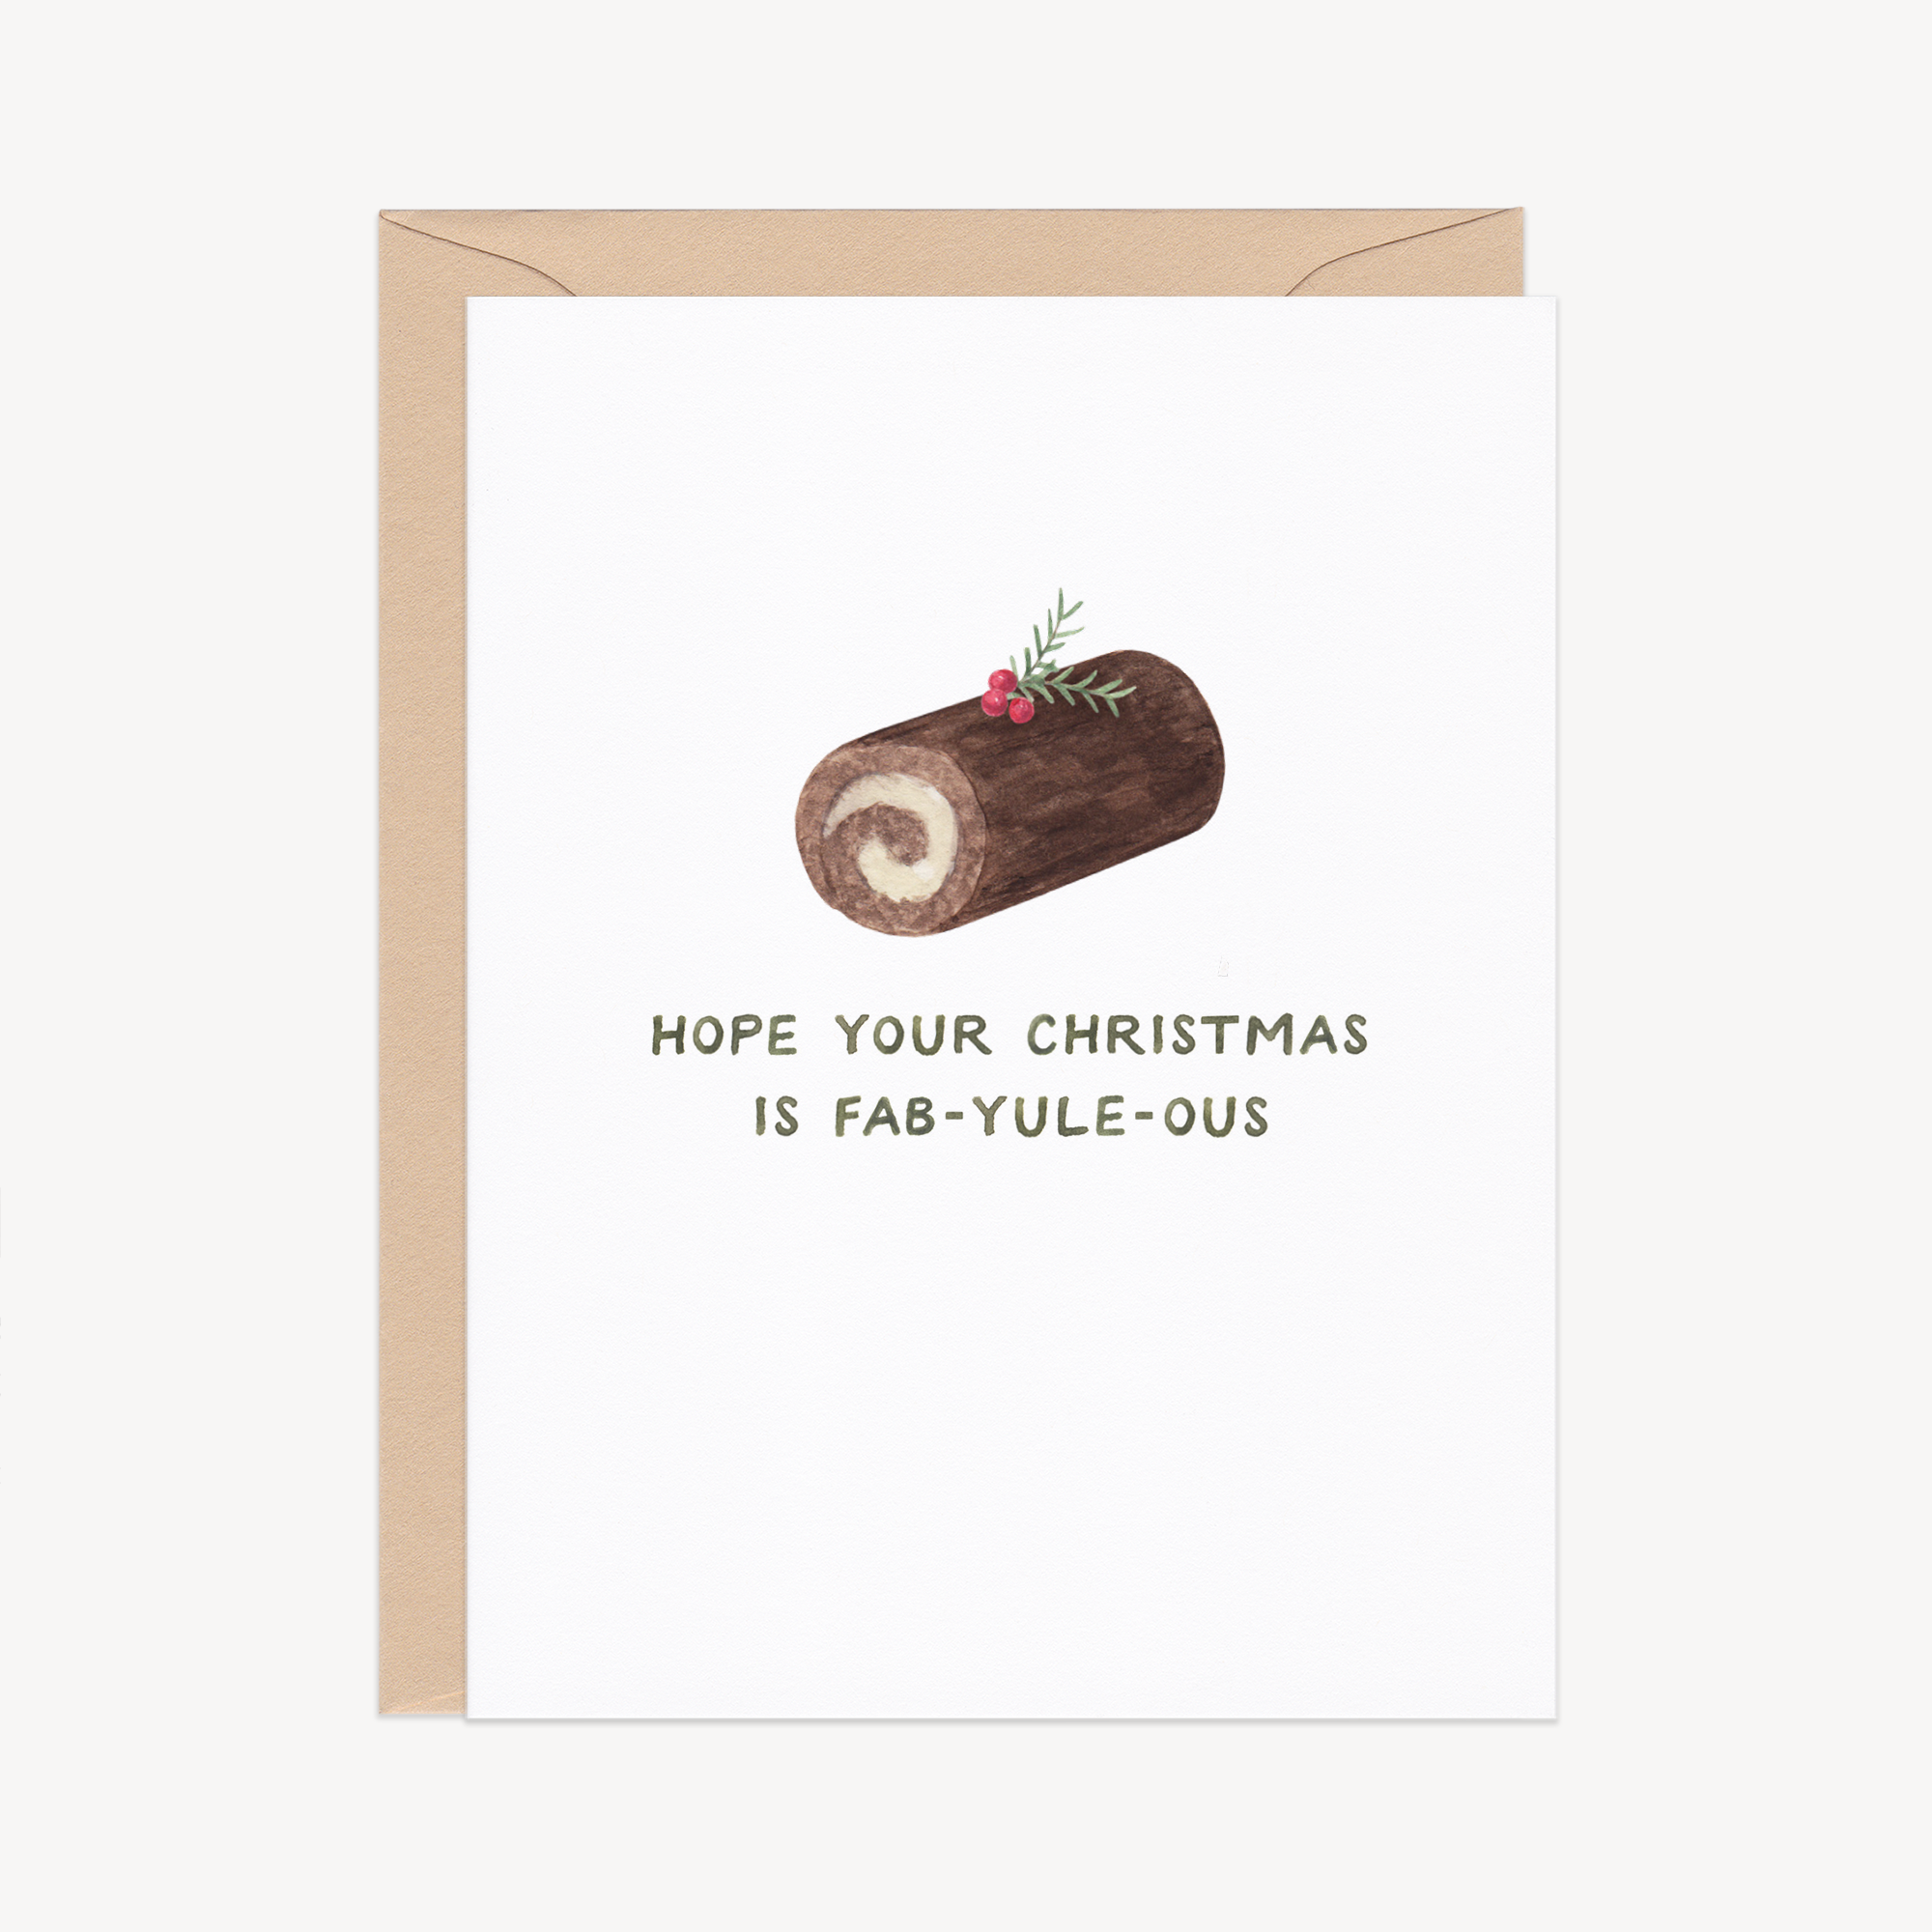 Fab-yule-ous Christmas Holiday Card